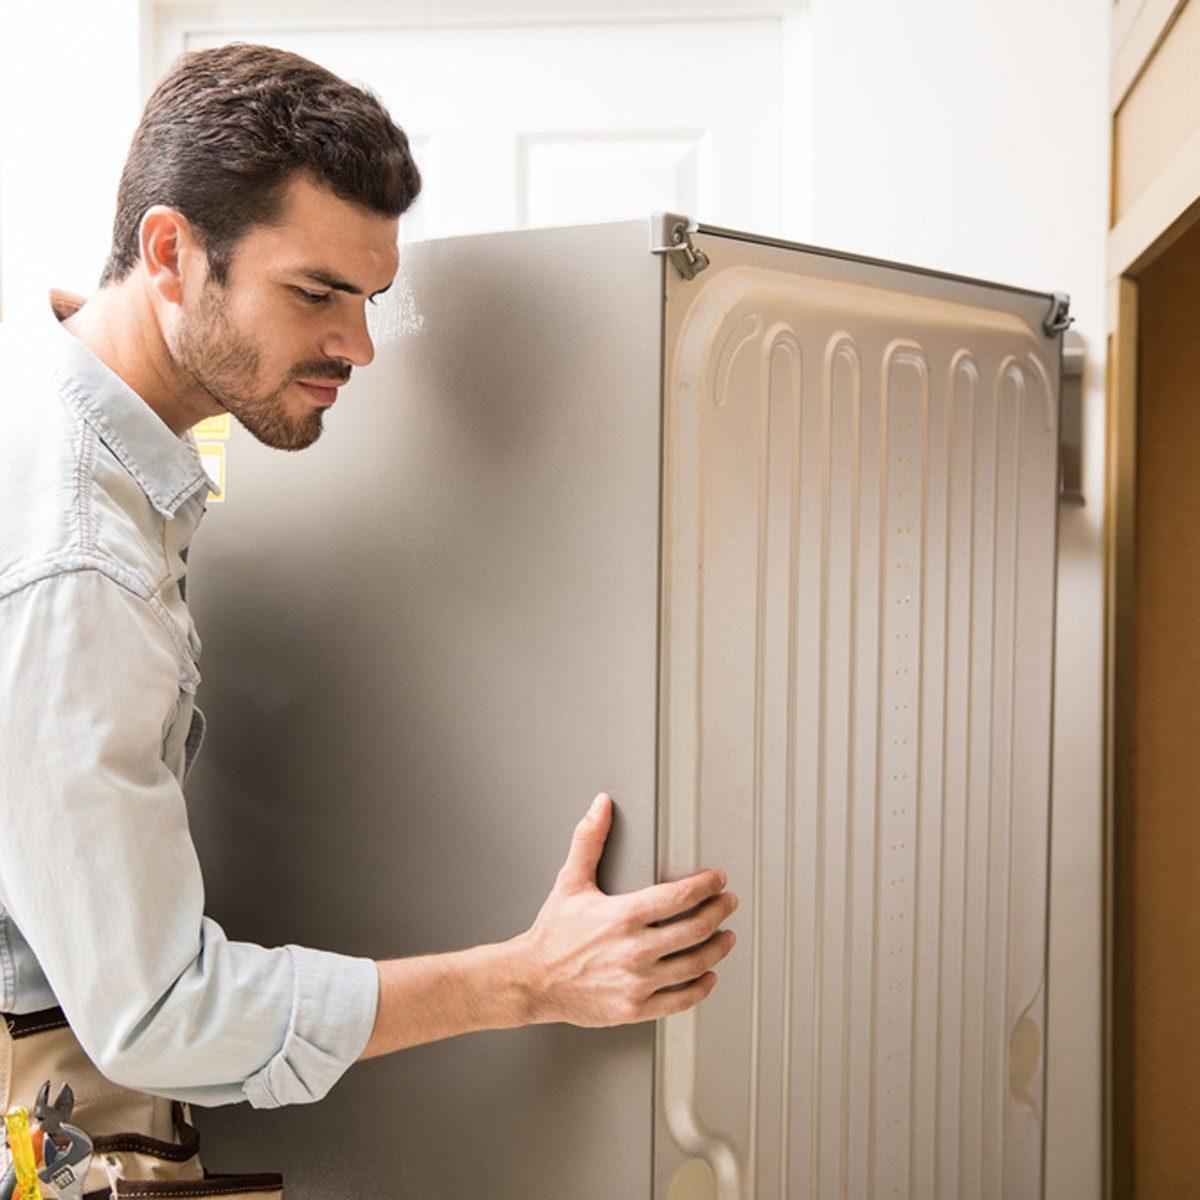 What to Check When Your Refrigerator Drip Pan is Full - Appliance